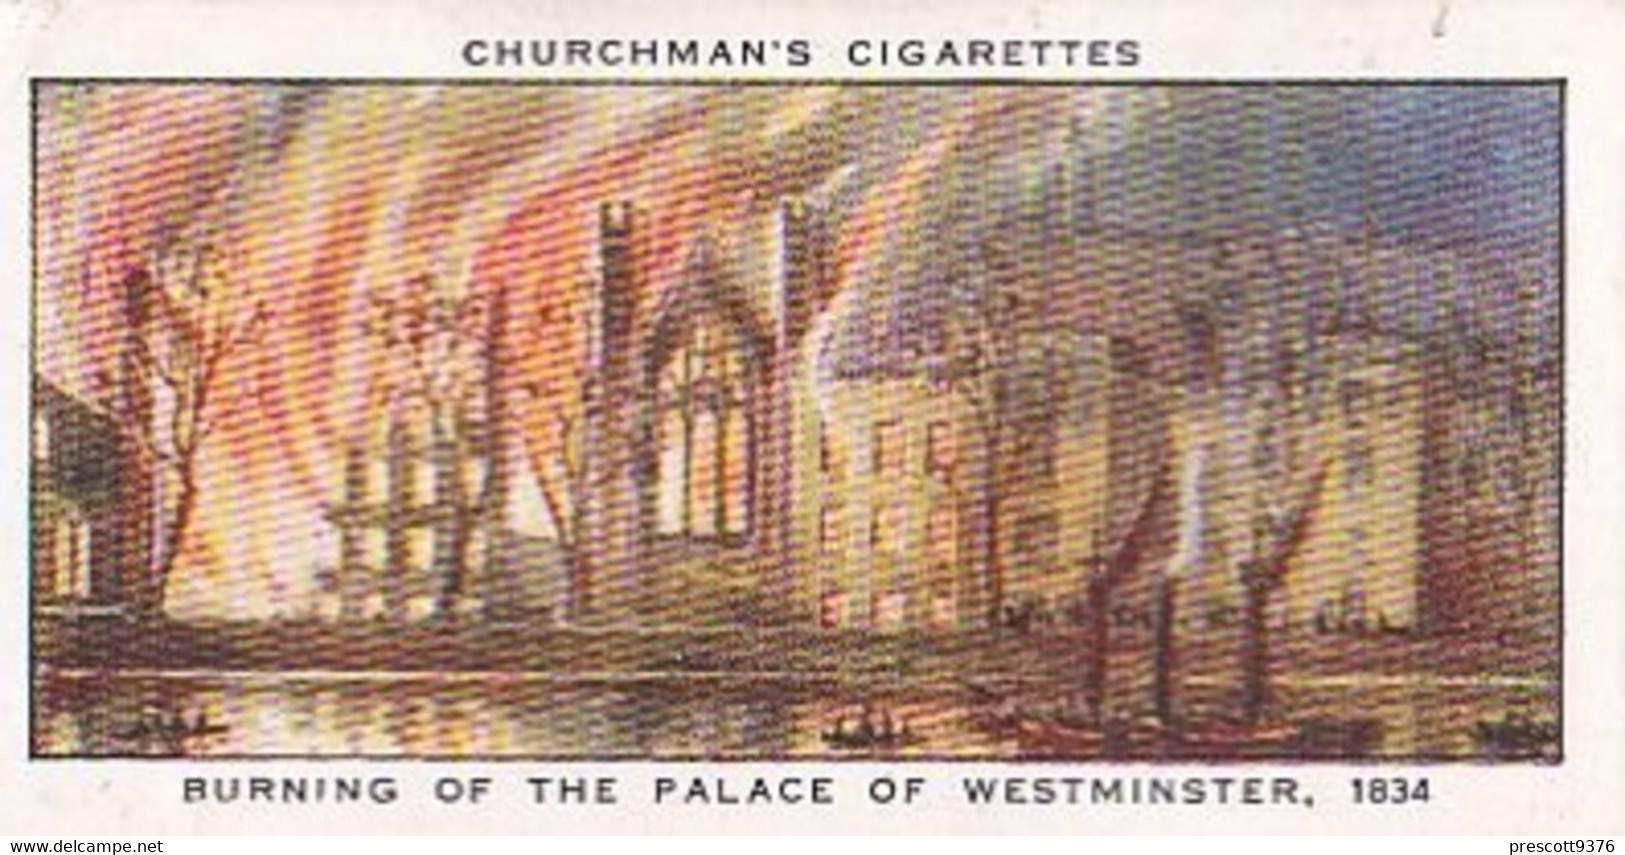 Houses Of Parliament Story 1931  - 23 Palace Of Westminster Fire 1834 - Churchman Cigarette Card - Original - - Churchman